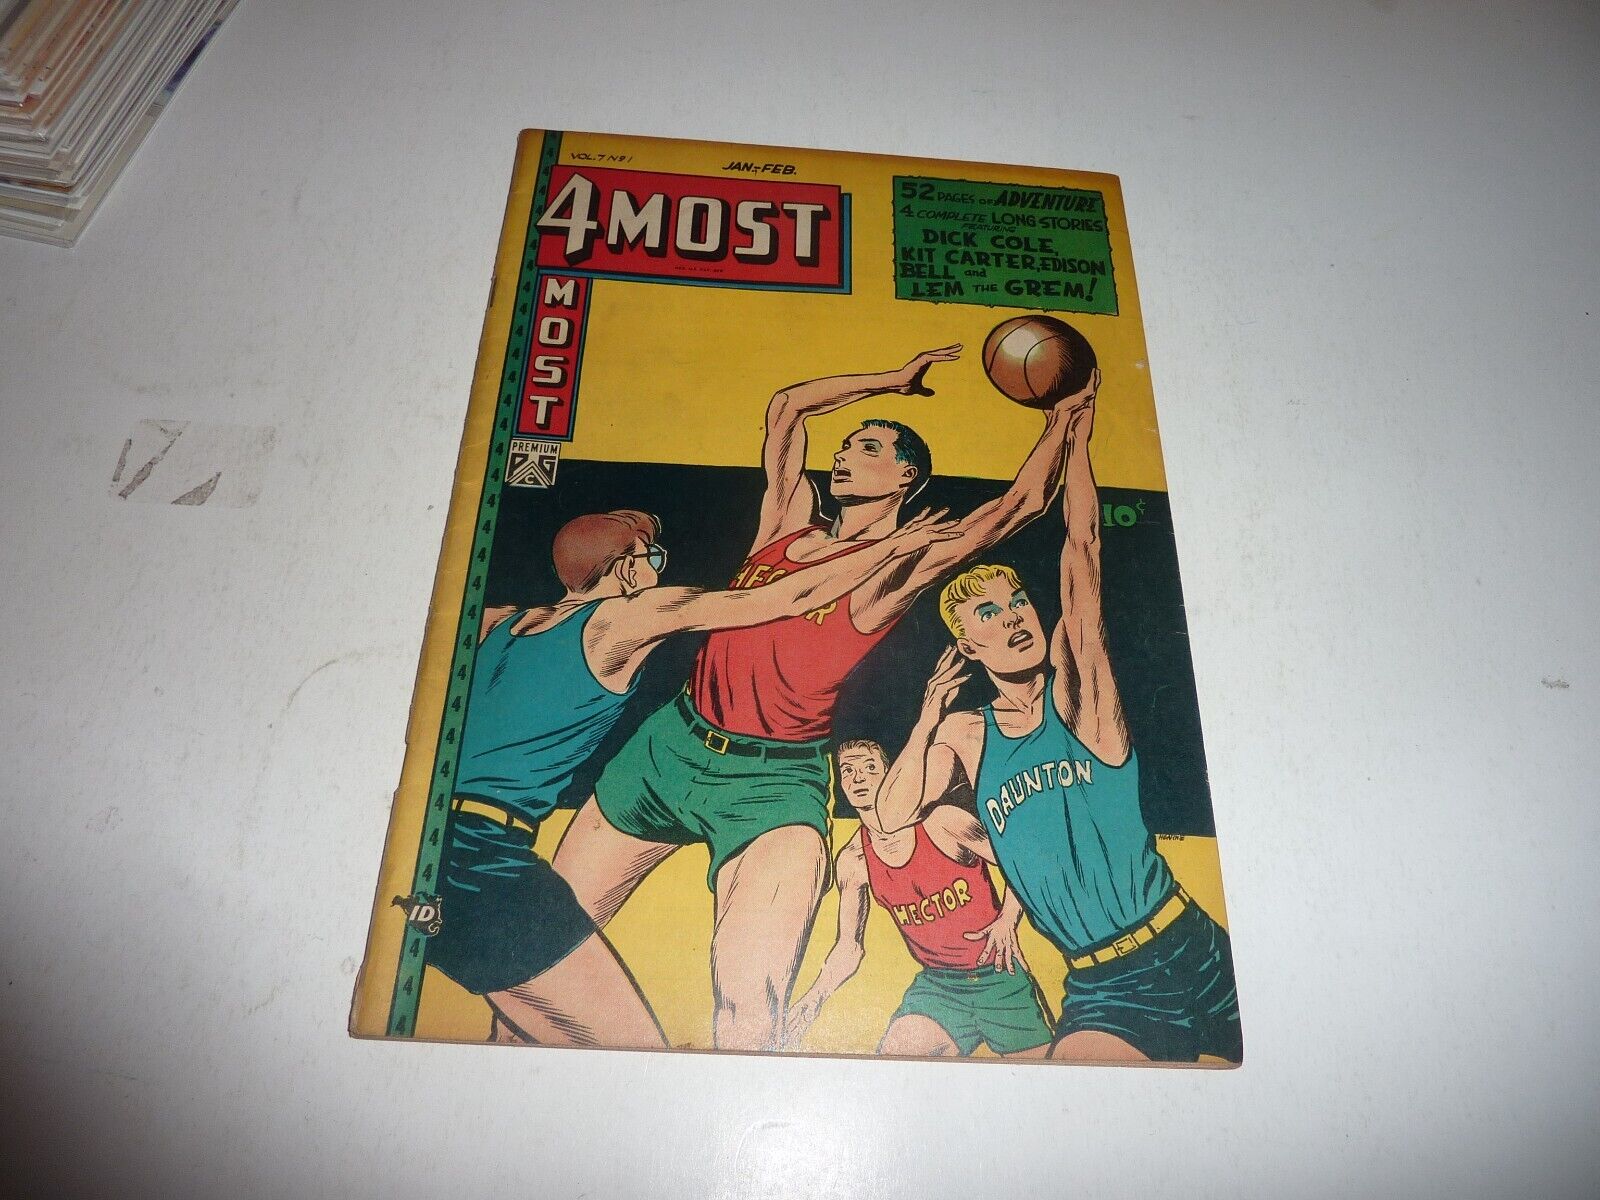 4MOST Vol. 7 #1 Novelty Press 1948 DICK COLE Golden Age Basketball Cover VG 4.0